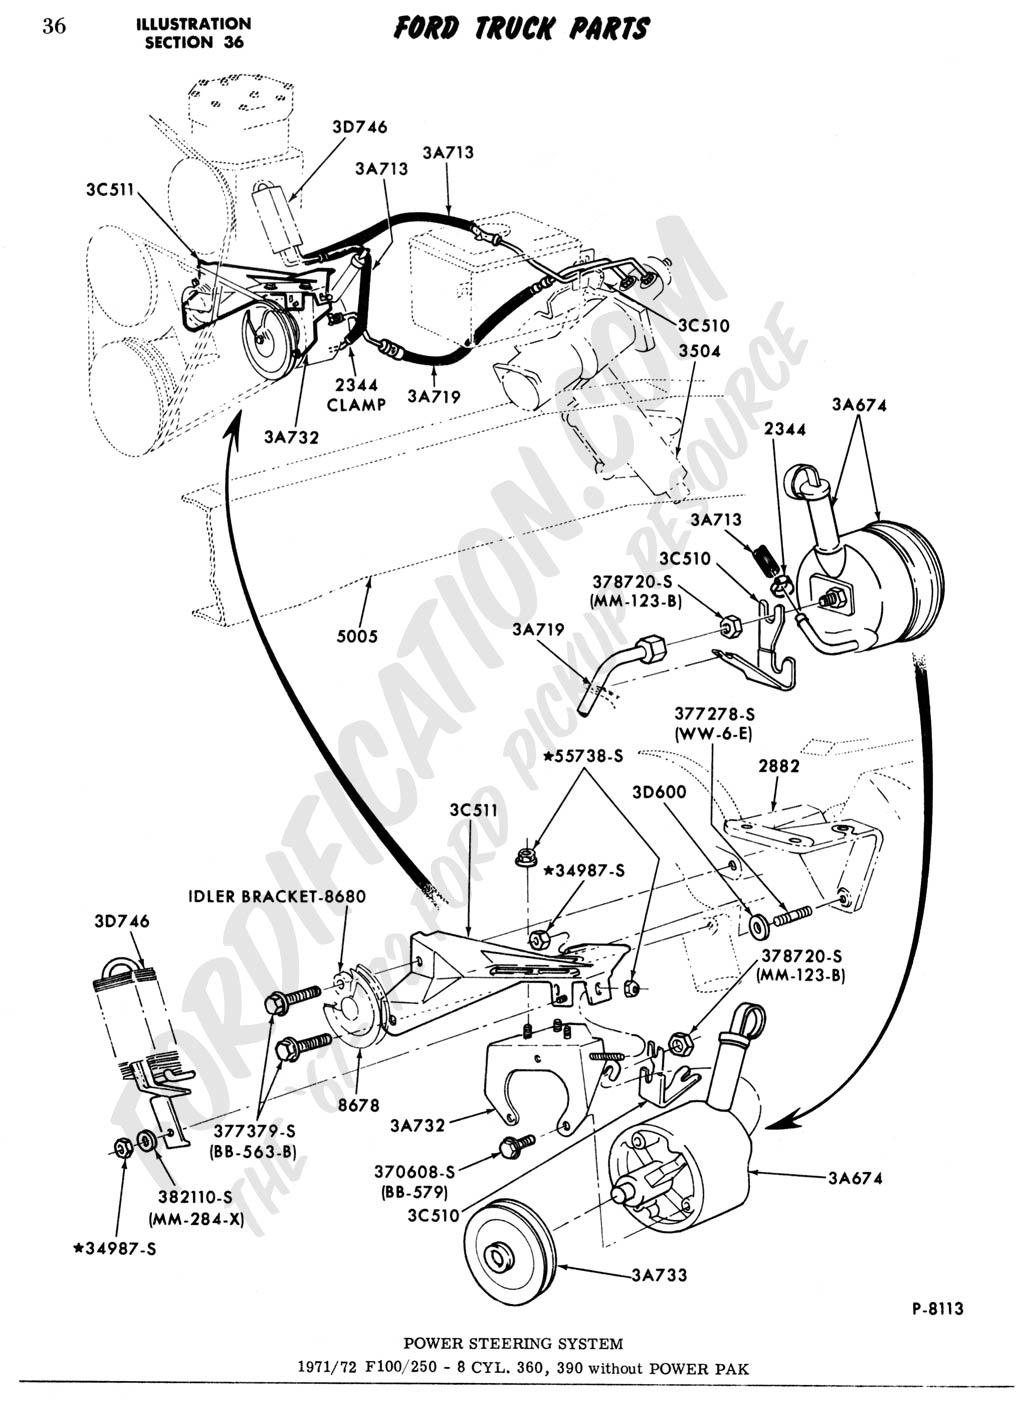 Ford Truck Technical Drawings and Schematics - Section C ... 2006 f250 light schematic 